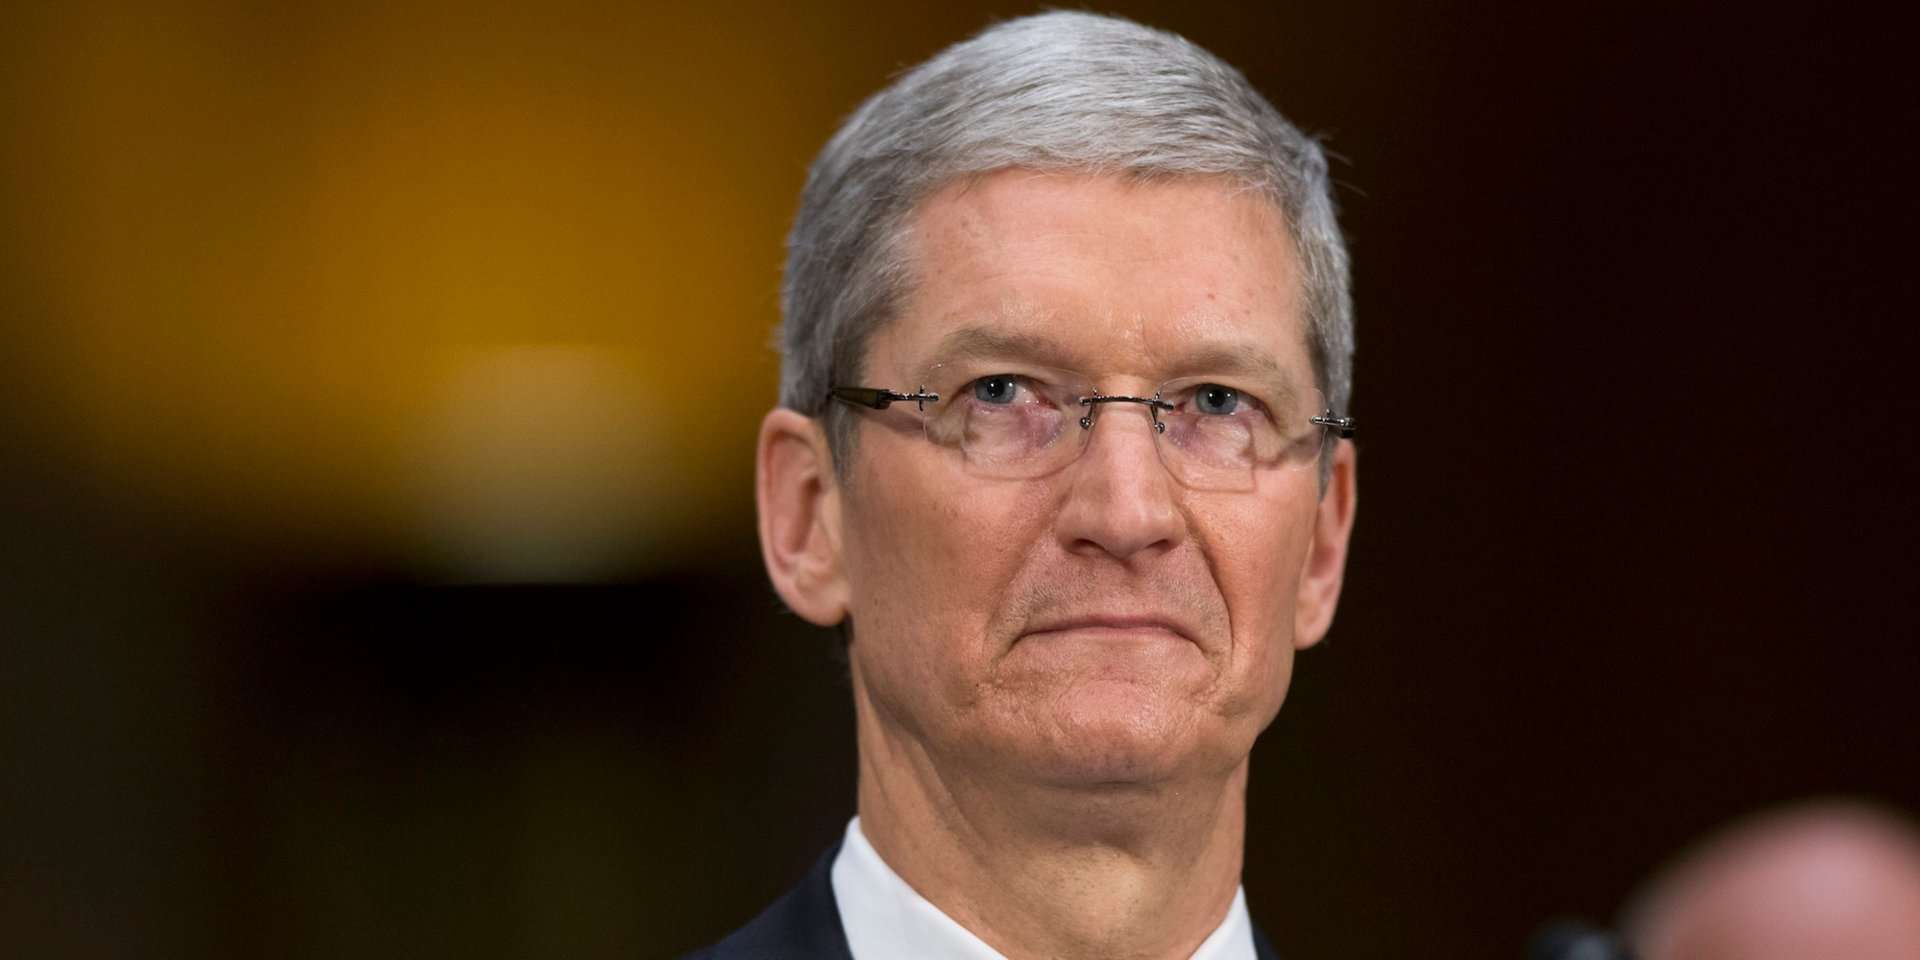 image for Apple CEO Tim Cook says digital privacy 'has become a crisis'